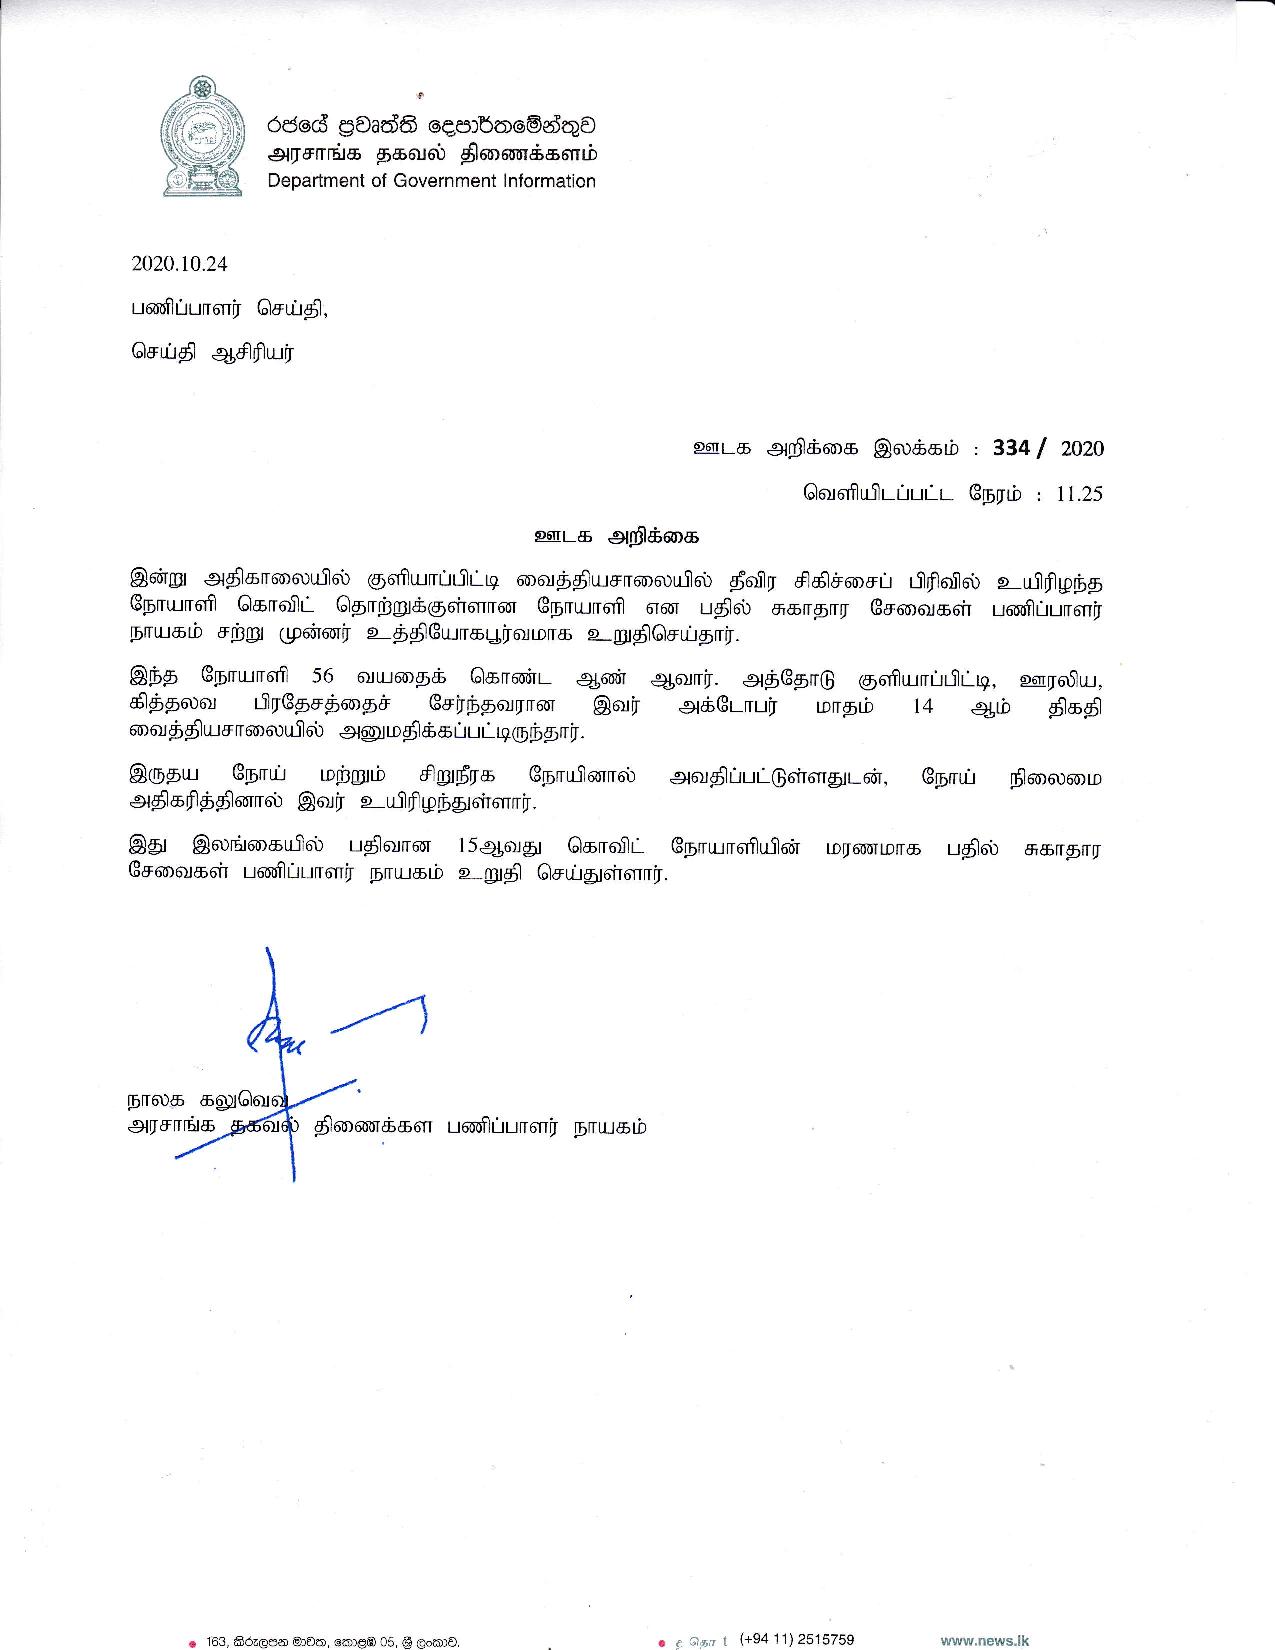 Release No 334 Tamil page 001